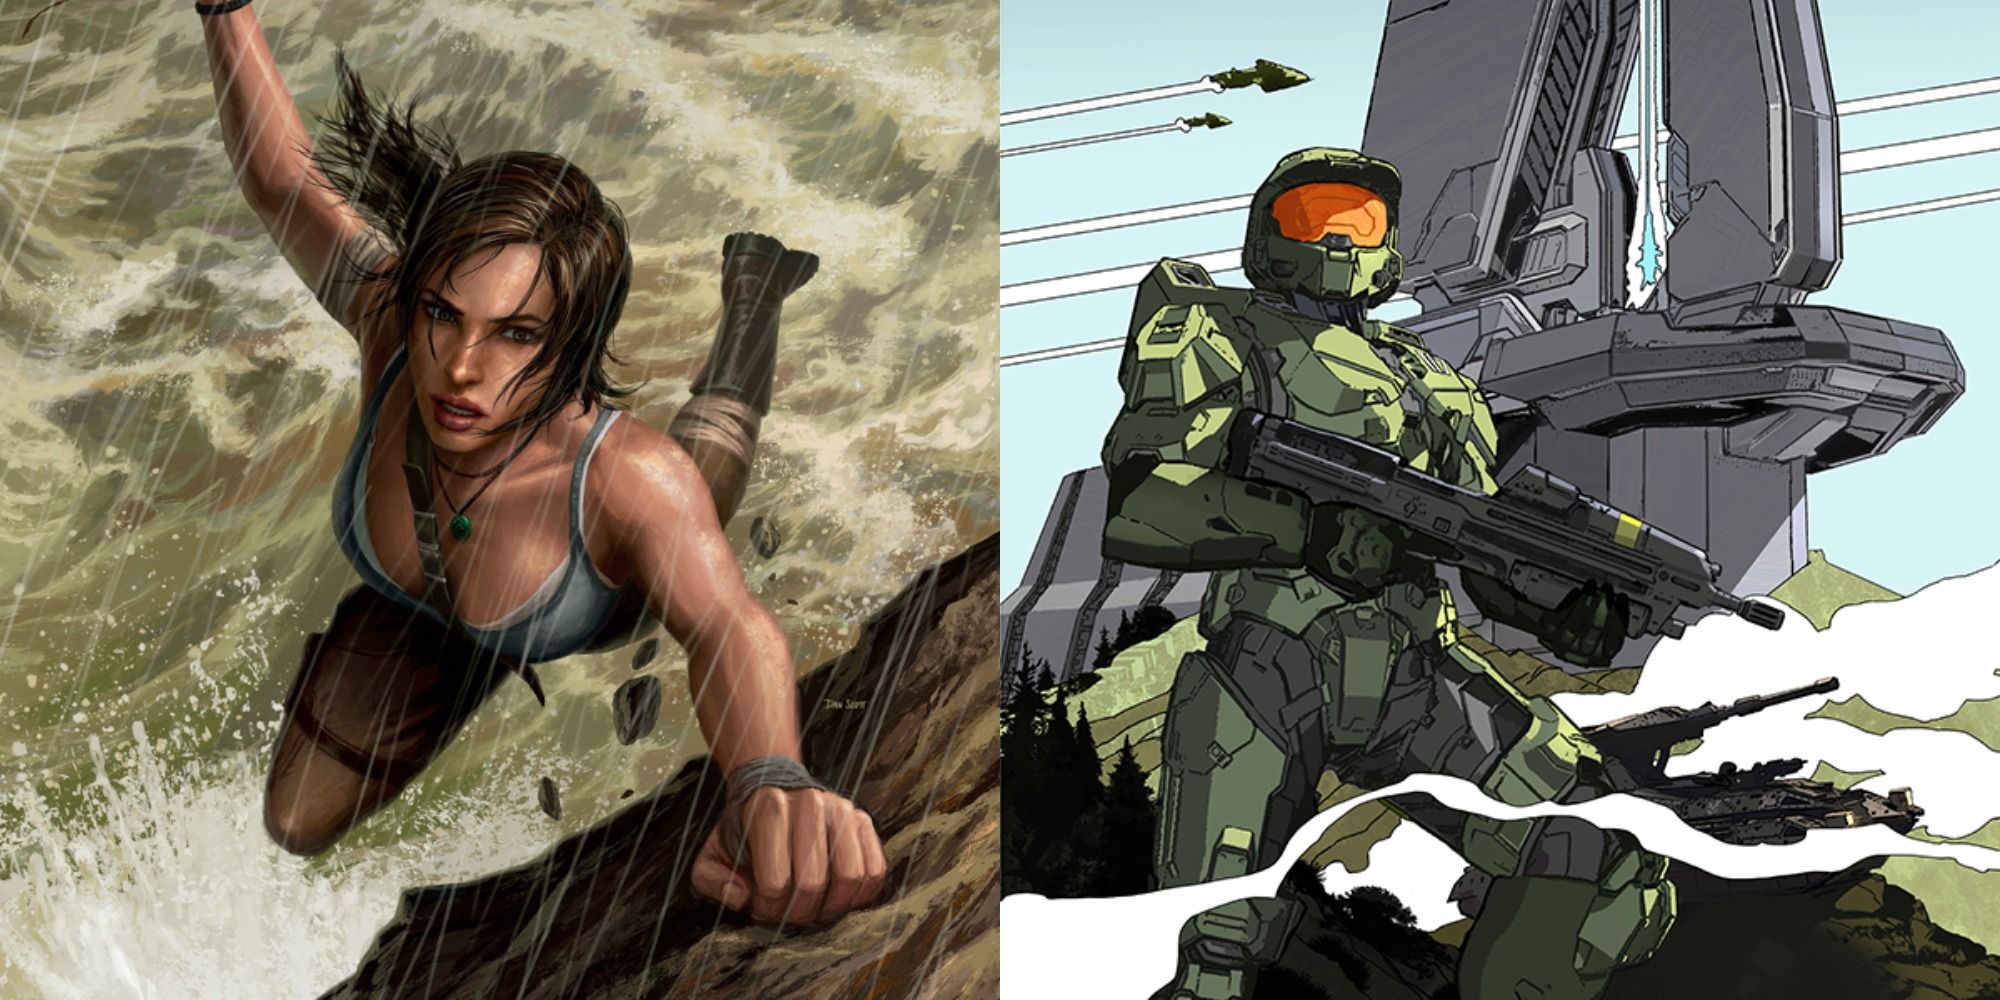 10 Best Comic Books Based On Video Games